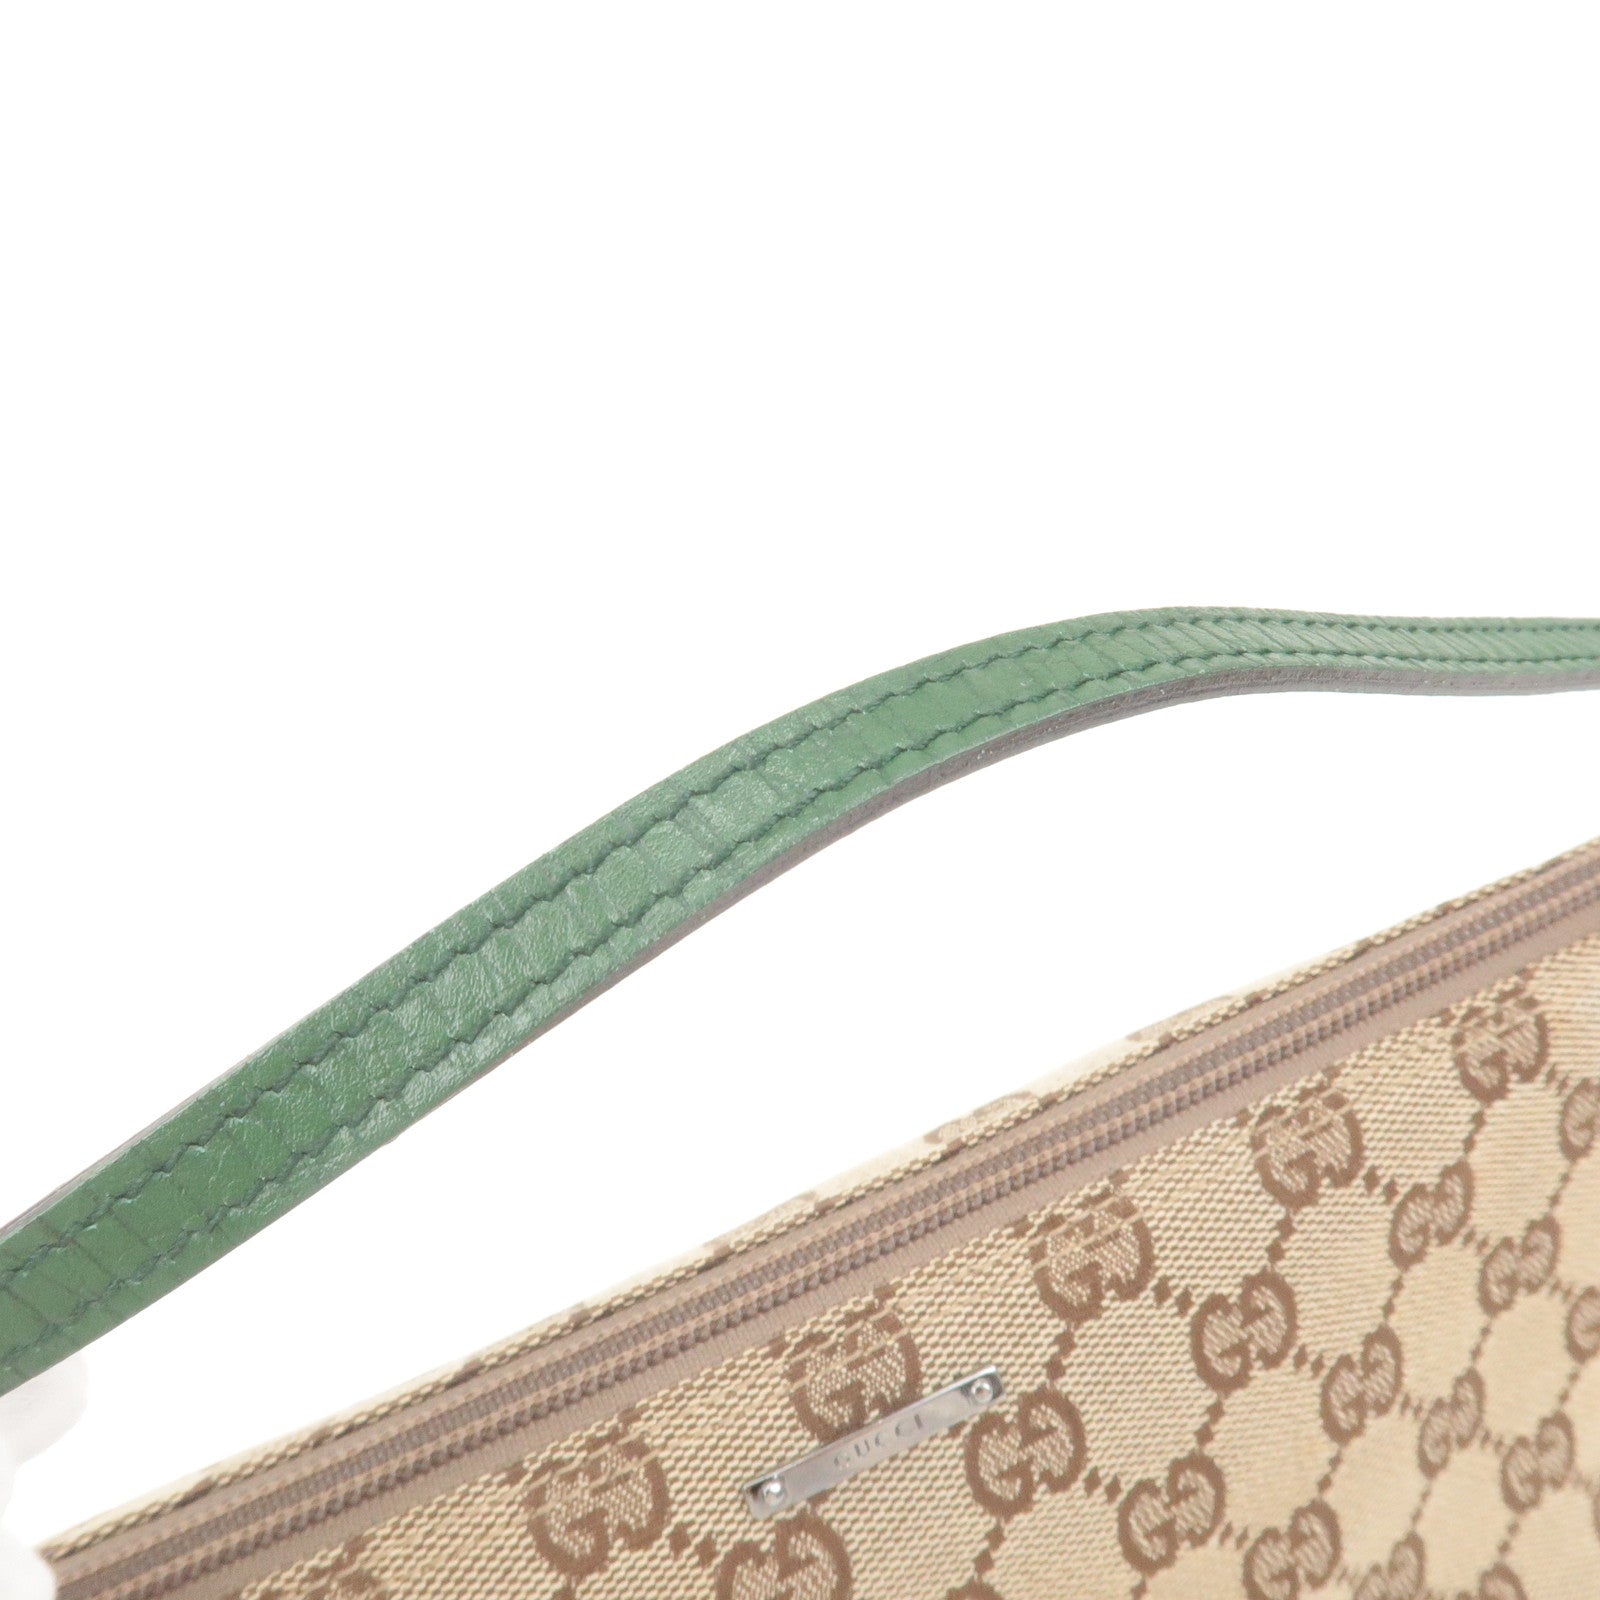 GUCCI-Boat-Bag-GG-Canvas-Leather-Hand-Bag-Beige-Red-07198 – dct-ep_vintage  luxury Store